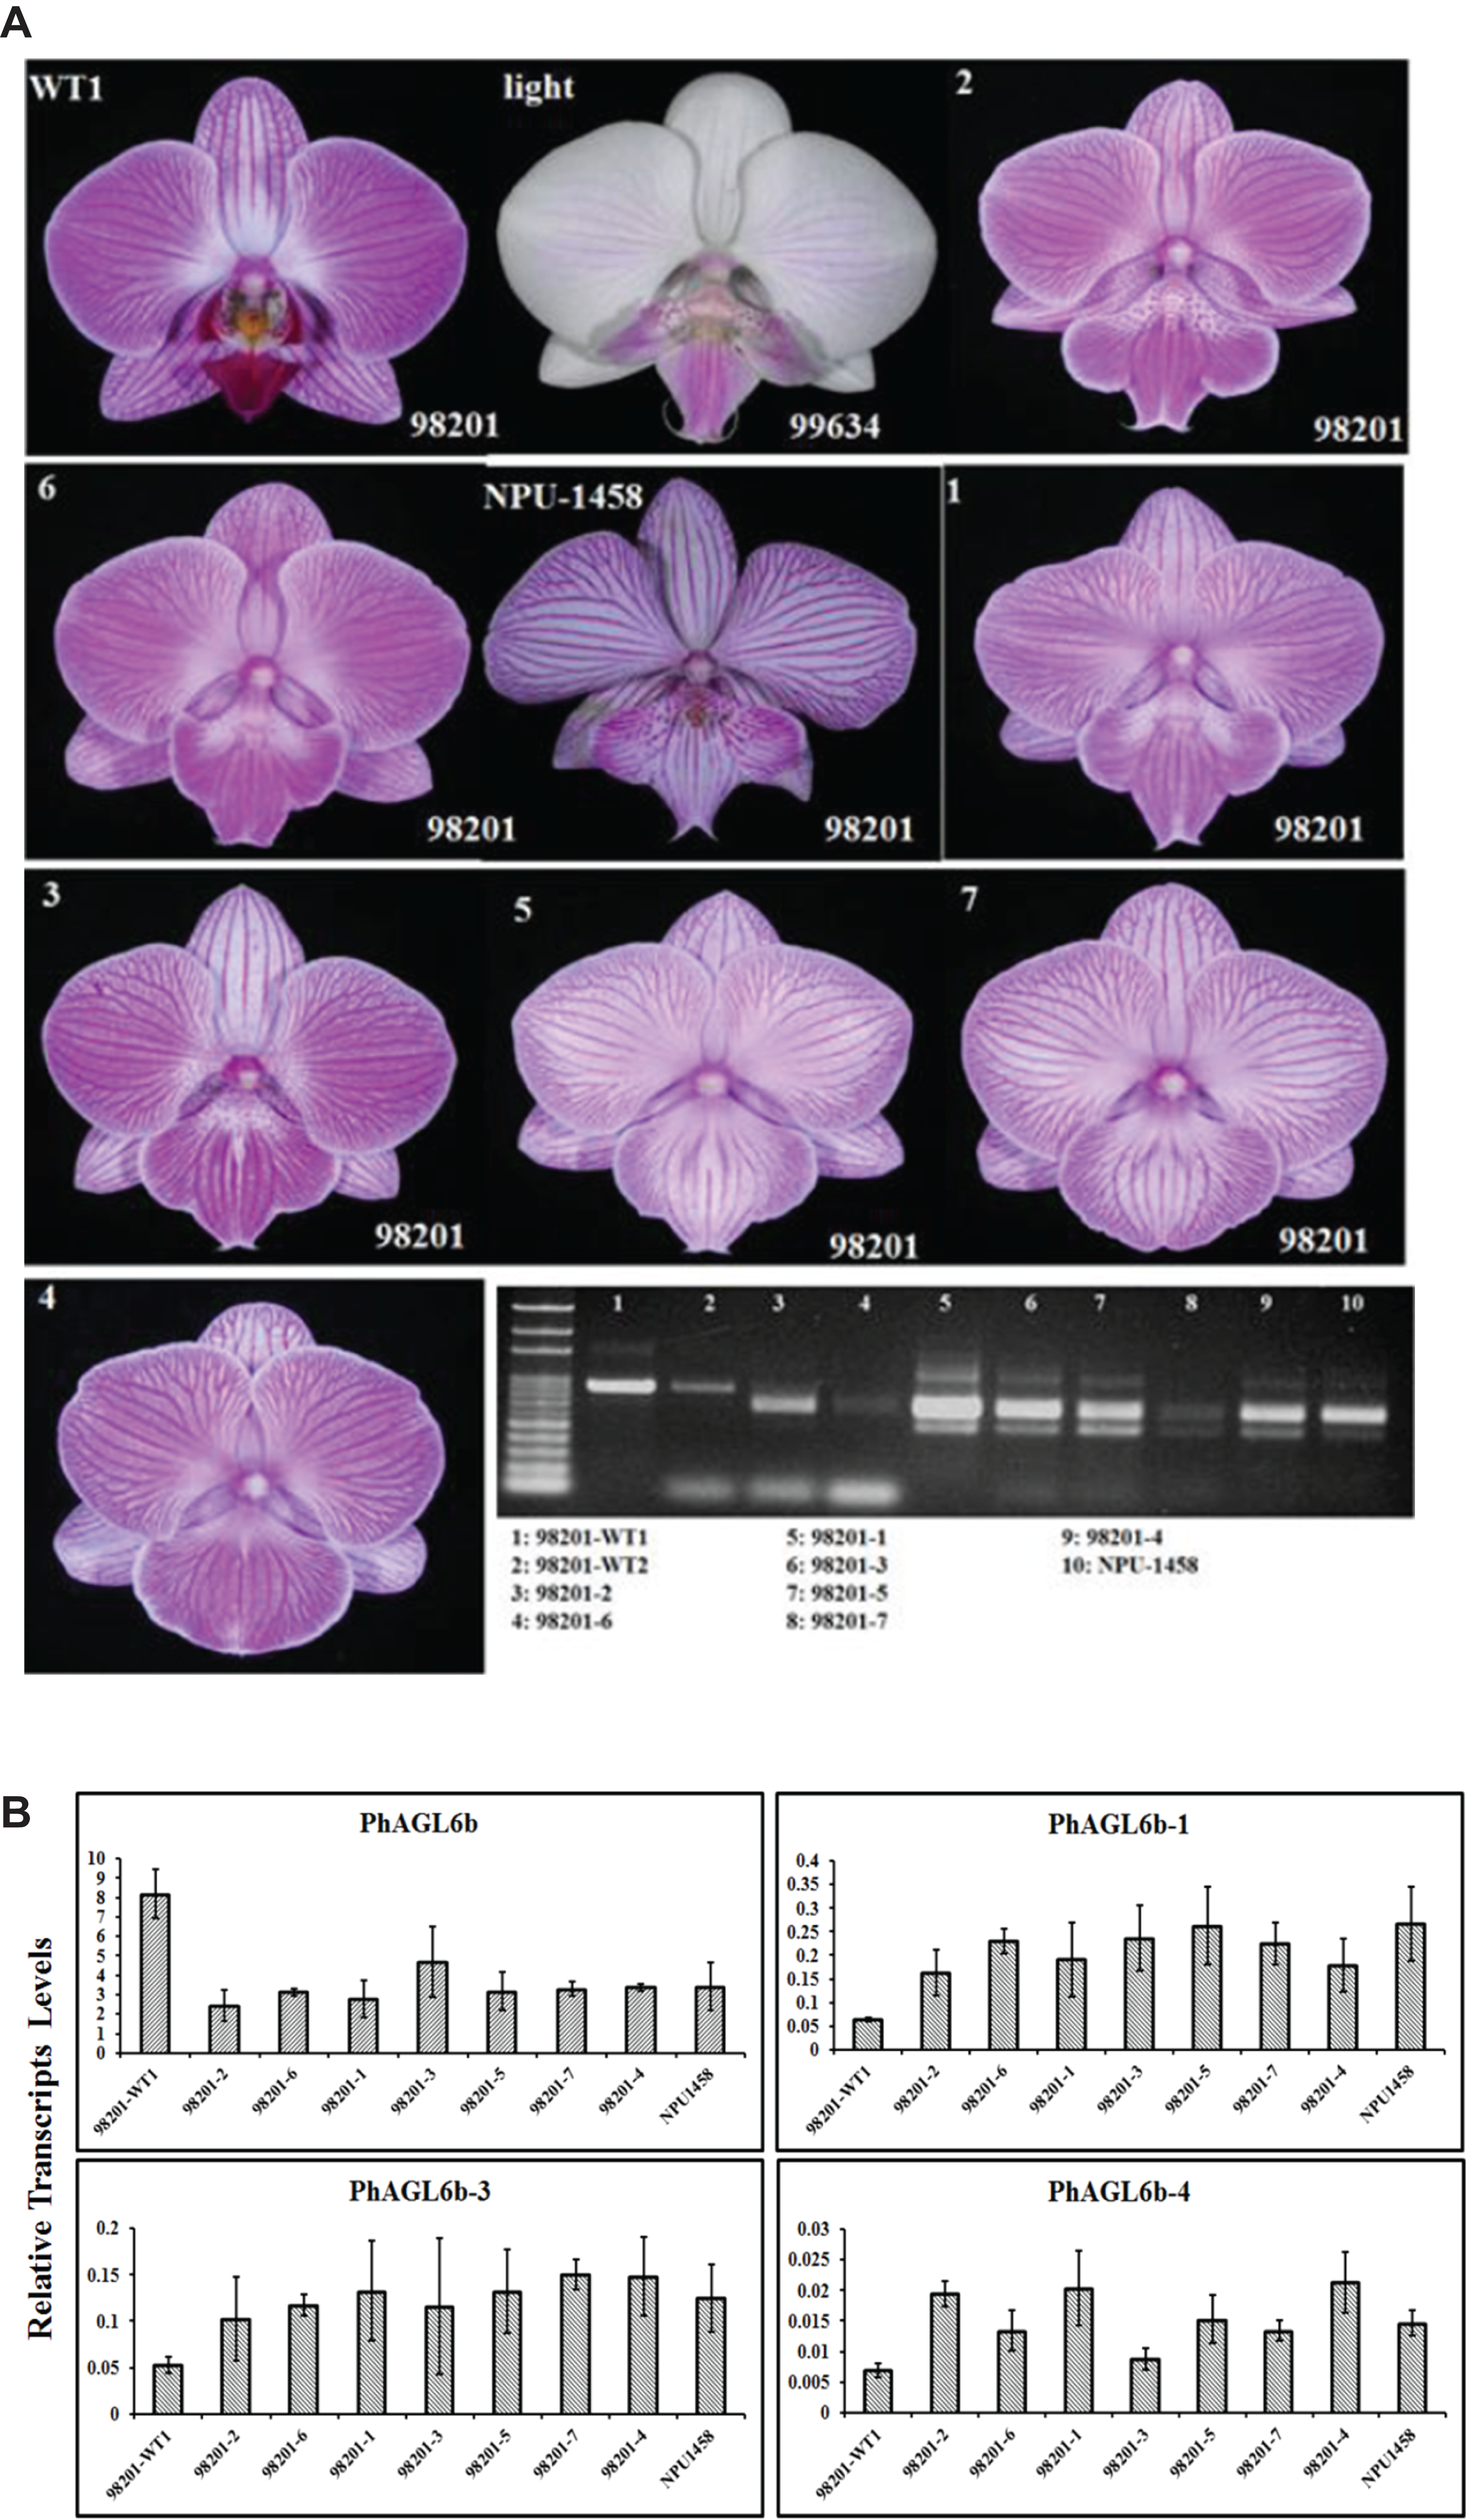 The Genome And Transcriptome Of Phalaenopsis Yield Insights Into Floral Organ Development And Flowering Regulation Peerj